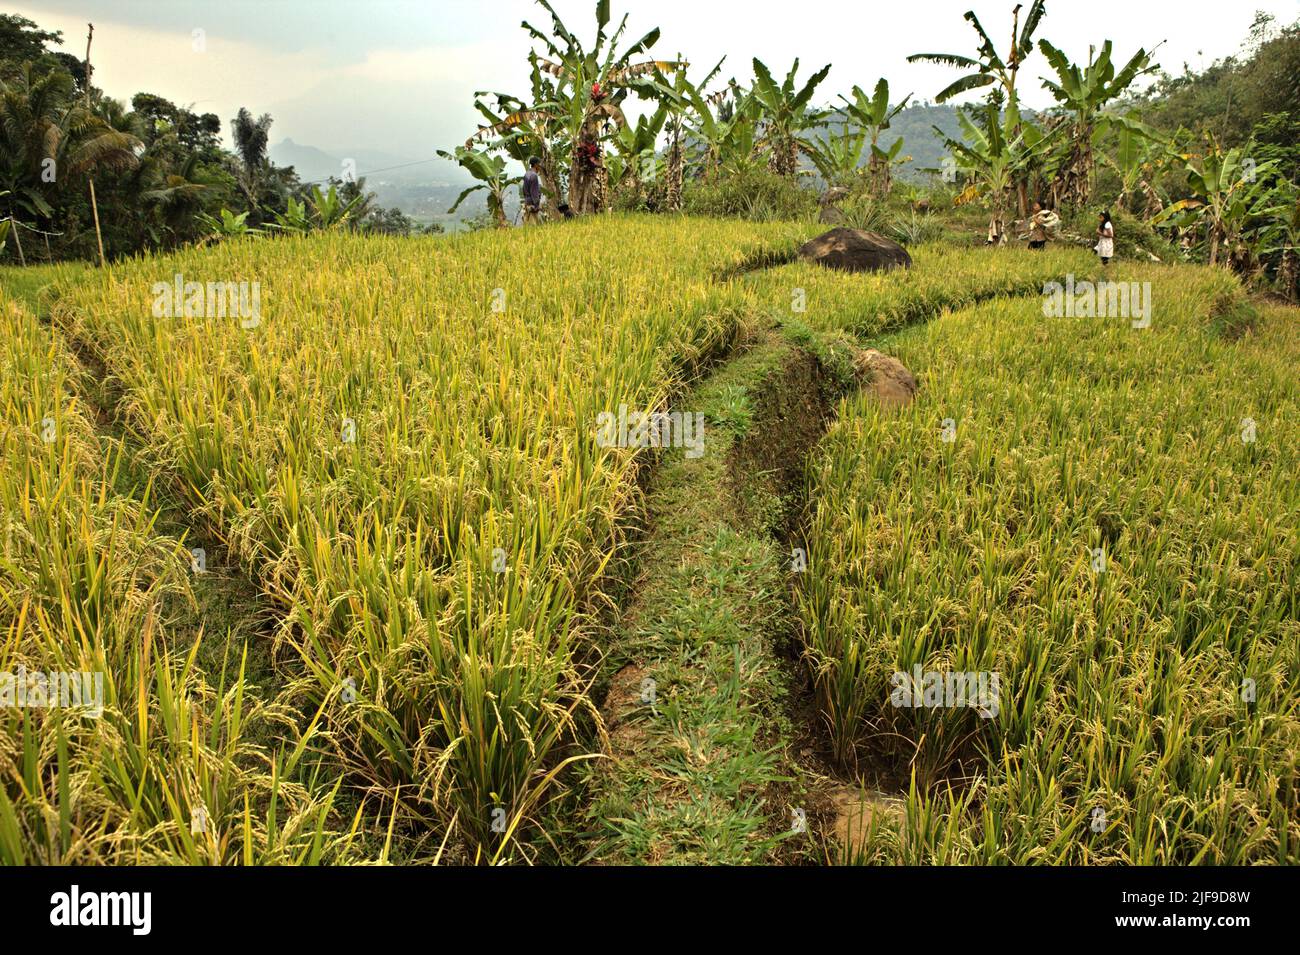 Ripe rice on a rice field in Sumedang, West Java, Indonesia. The latest data indicate the global harvested area of rice to have grown by 11% between 1990 and 2019, with total paddy production increasing by 46%, from 519 megaton to 755 megaton, according to Intergovernmental Panel on Climate Change (IPCC) in their 2022 report. Stock Photo